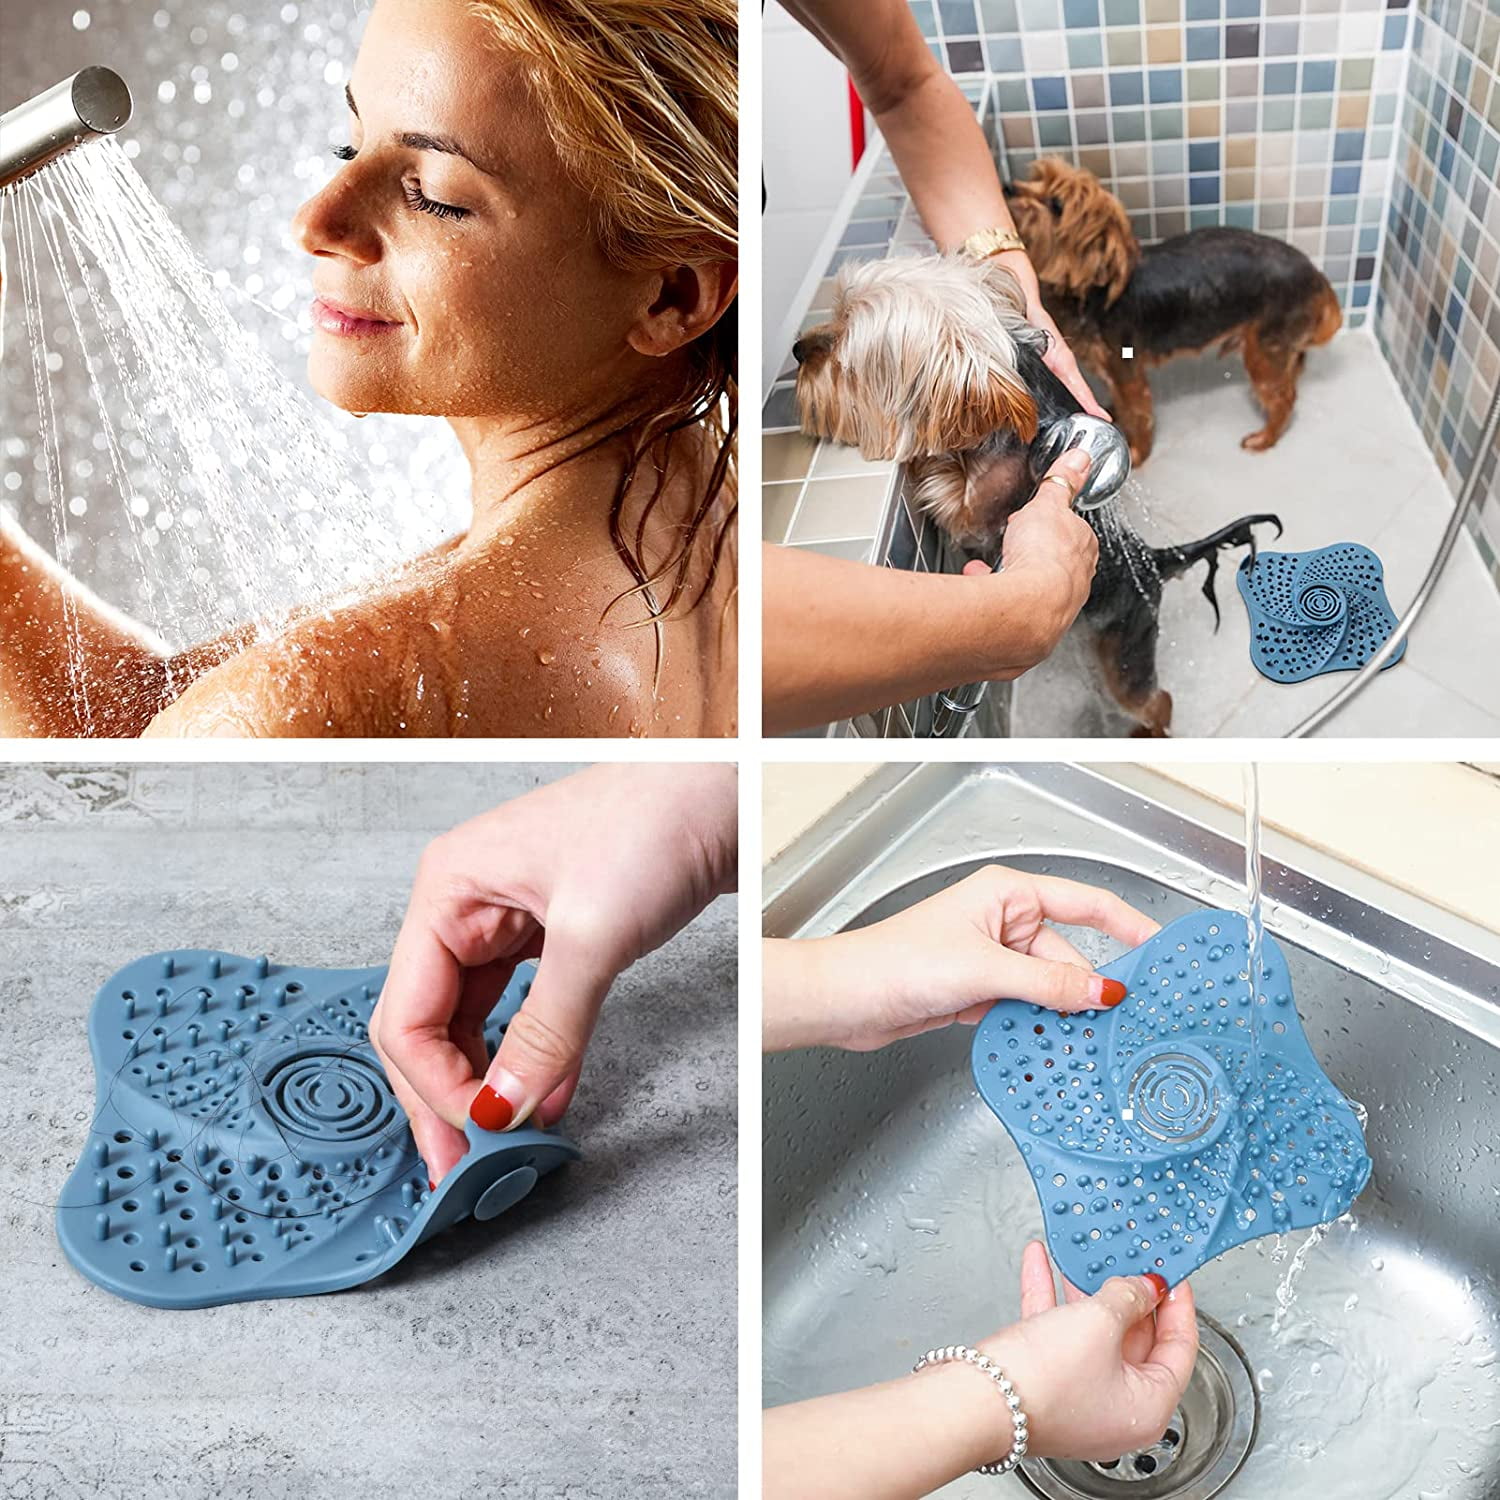 Diawss Shower Hair Drain Catcher,Convex Cover for Stopper with Suction  Cup,Suit for Bathroom,Bathtub